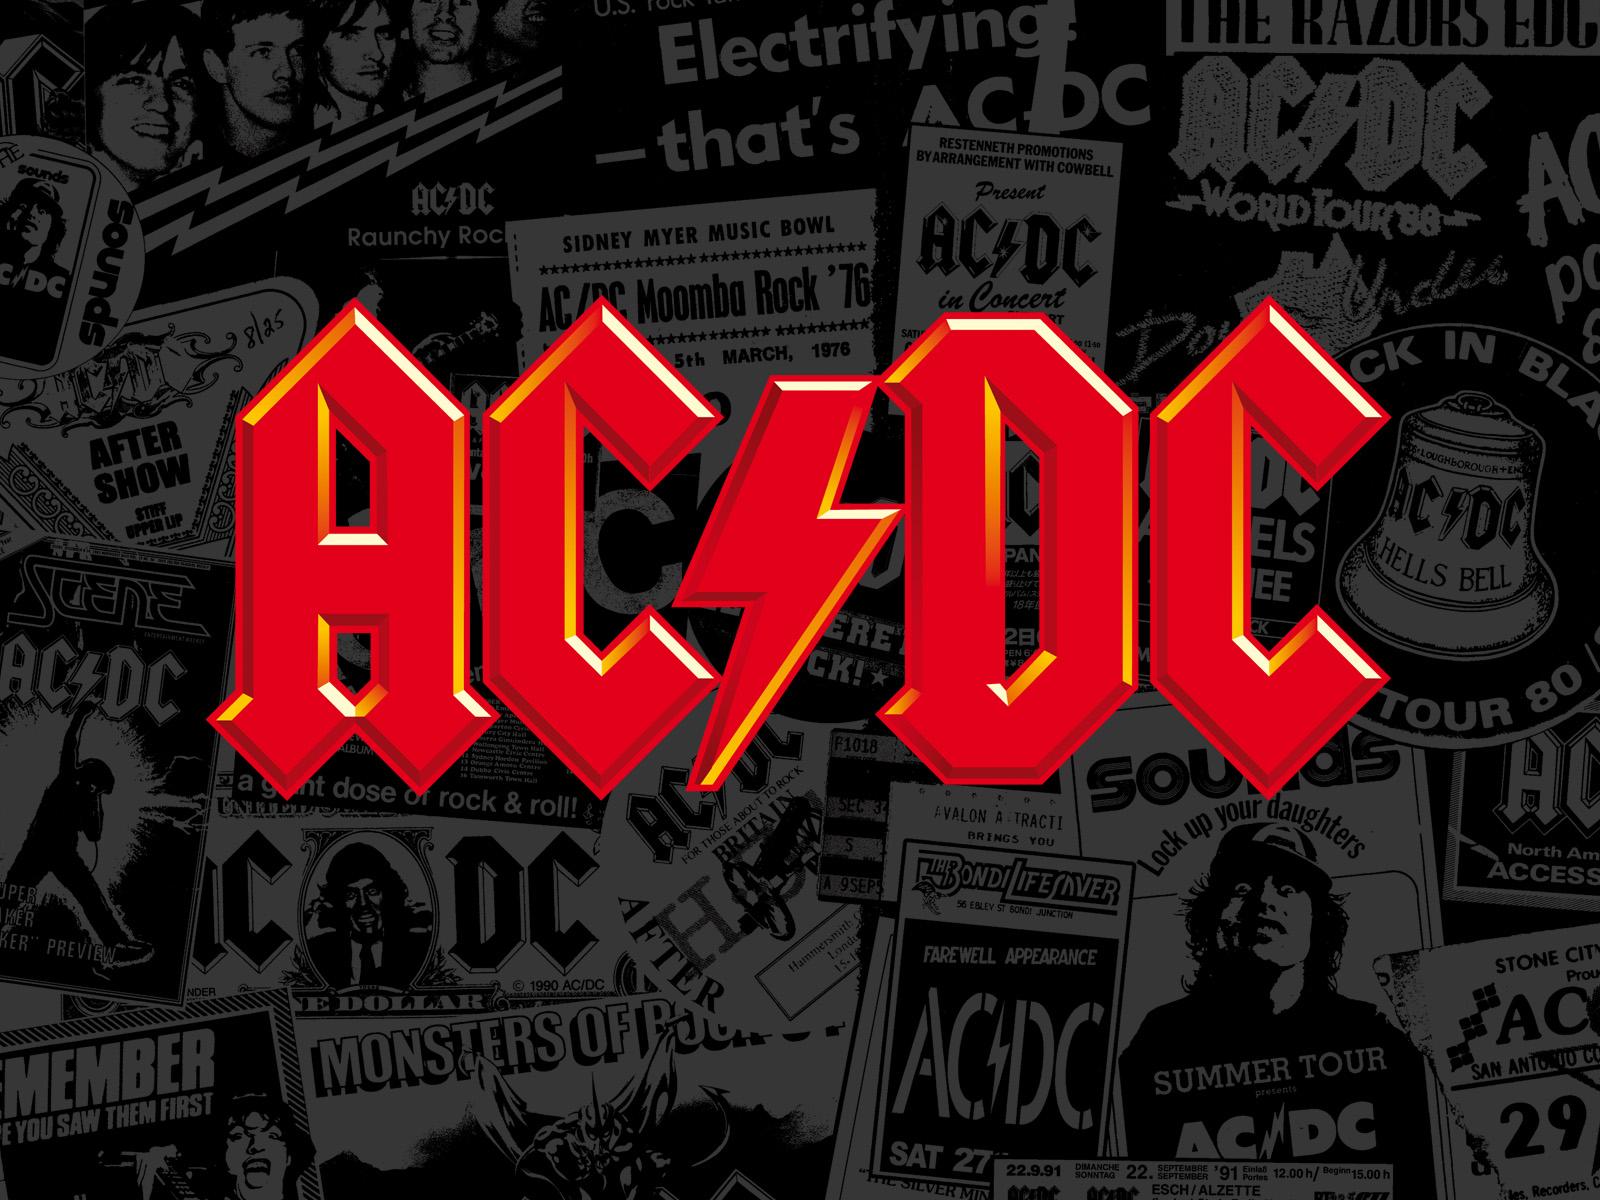 ac dc full discography torrent